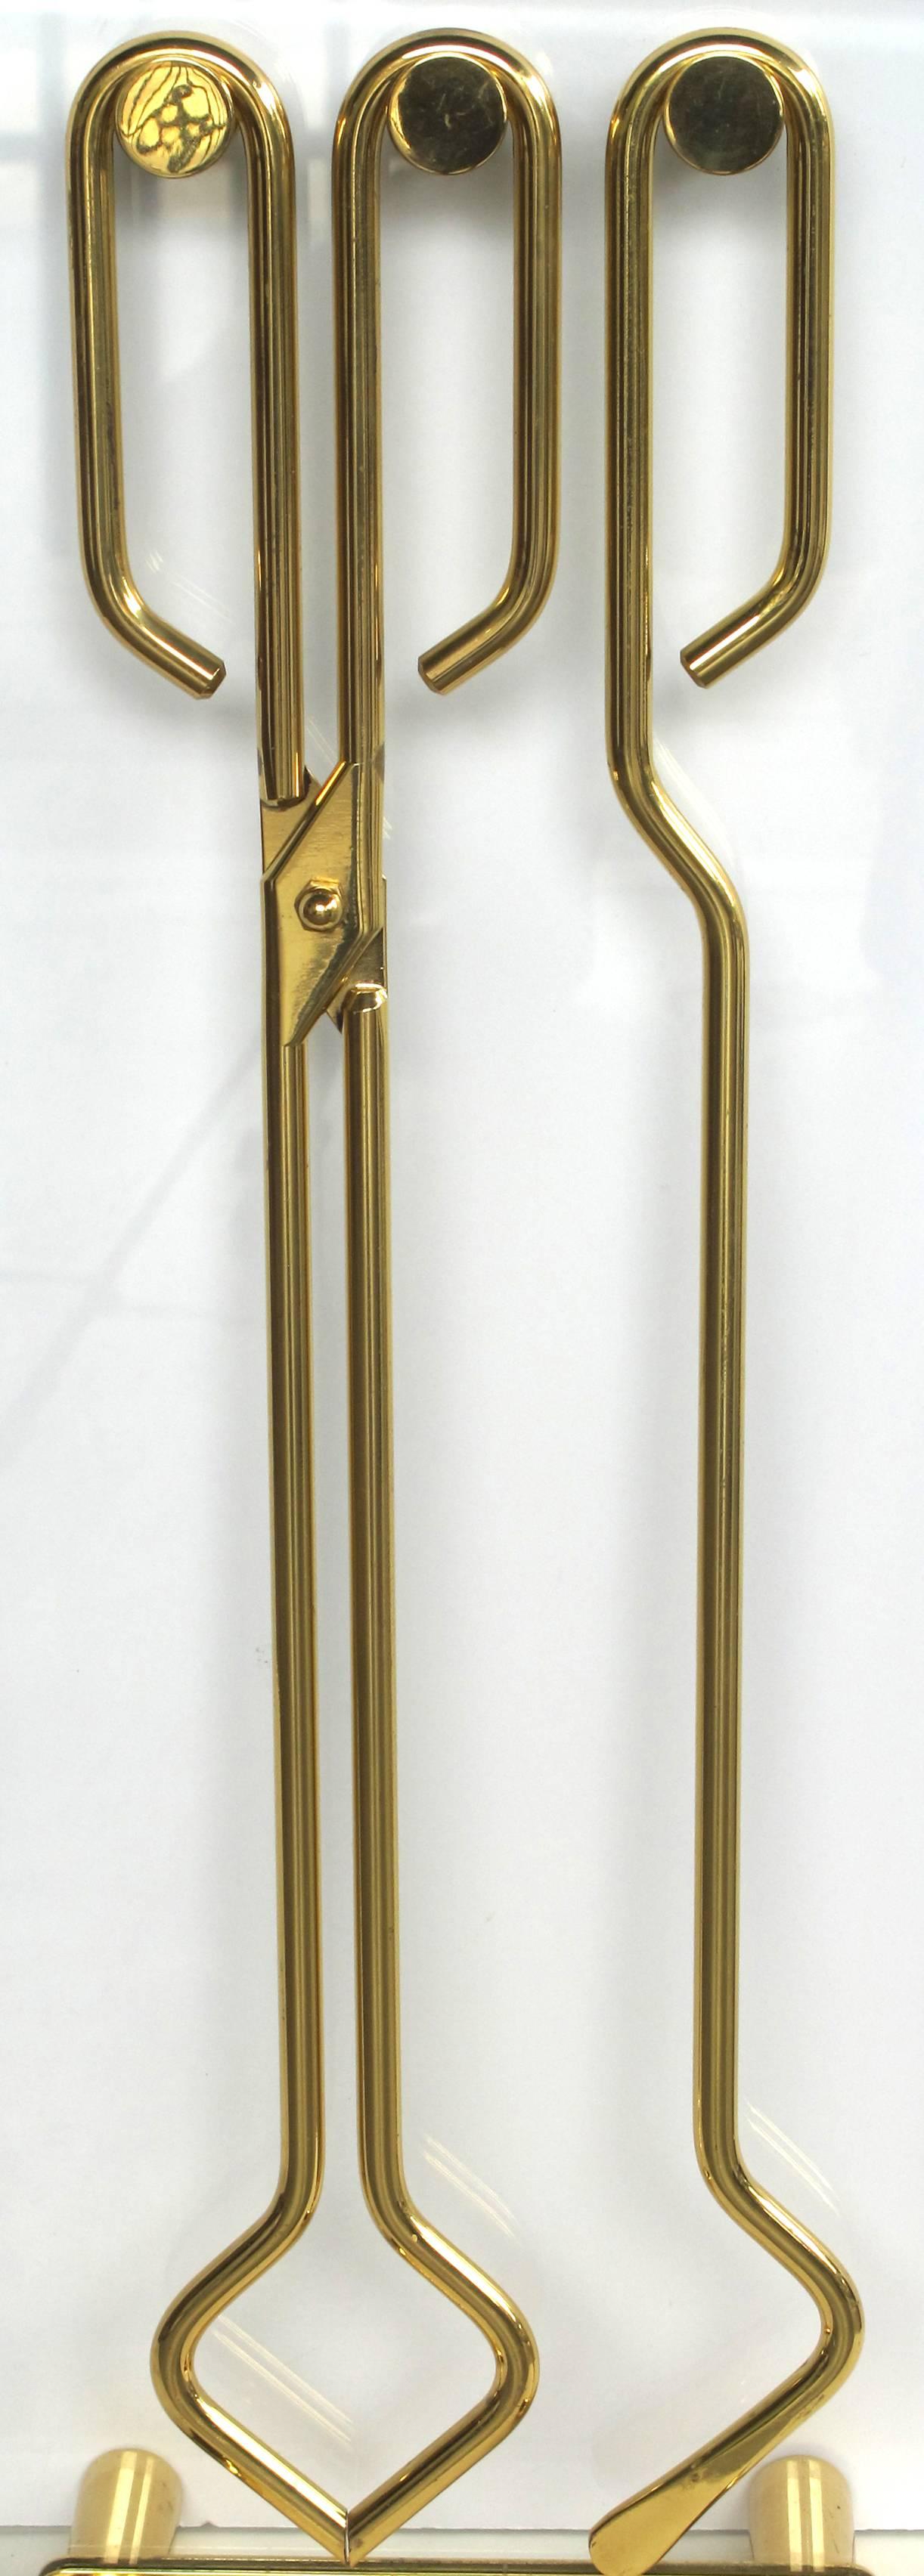 A stylish French 1960s gilt-metal and glass fire tool set in the manner of Jacques Adnet; the upright glass stand raised on cylindrical rods; with protruding knobs suspending two tools.